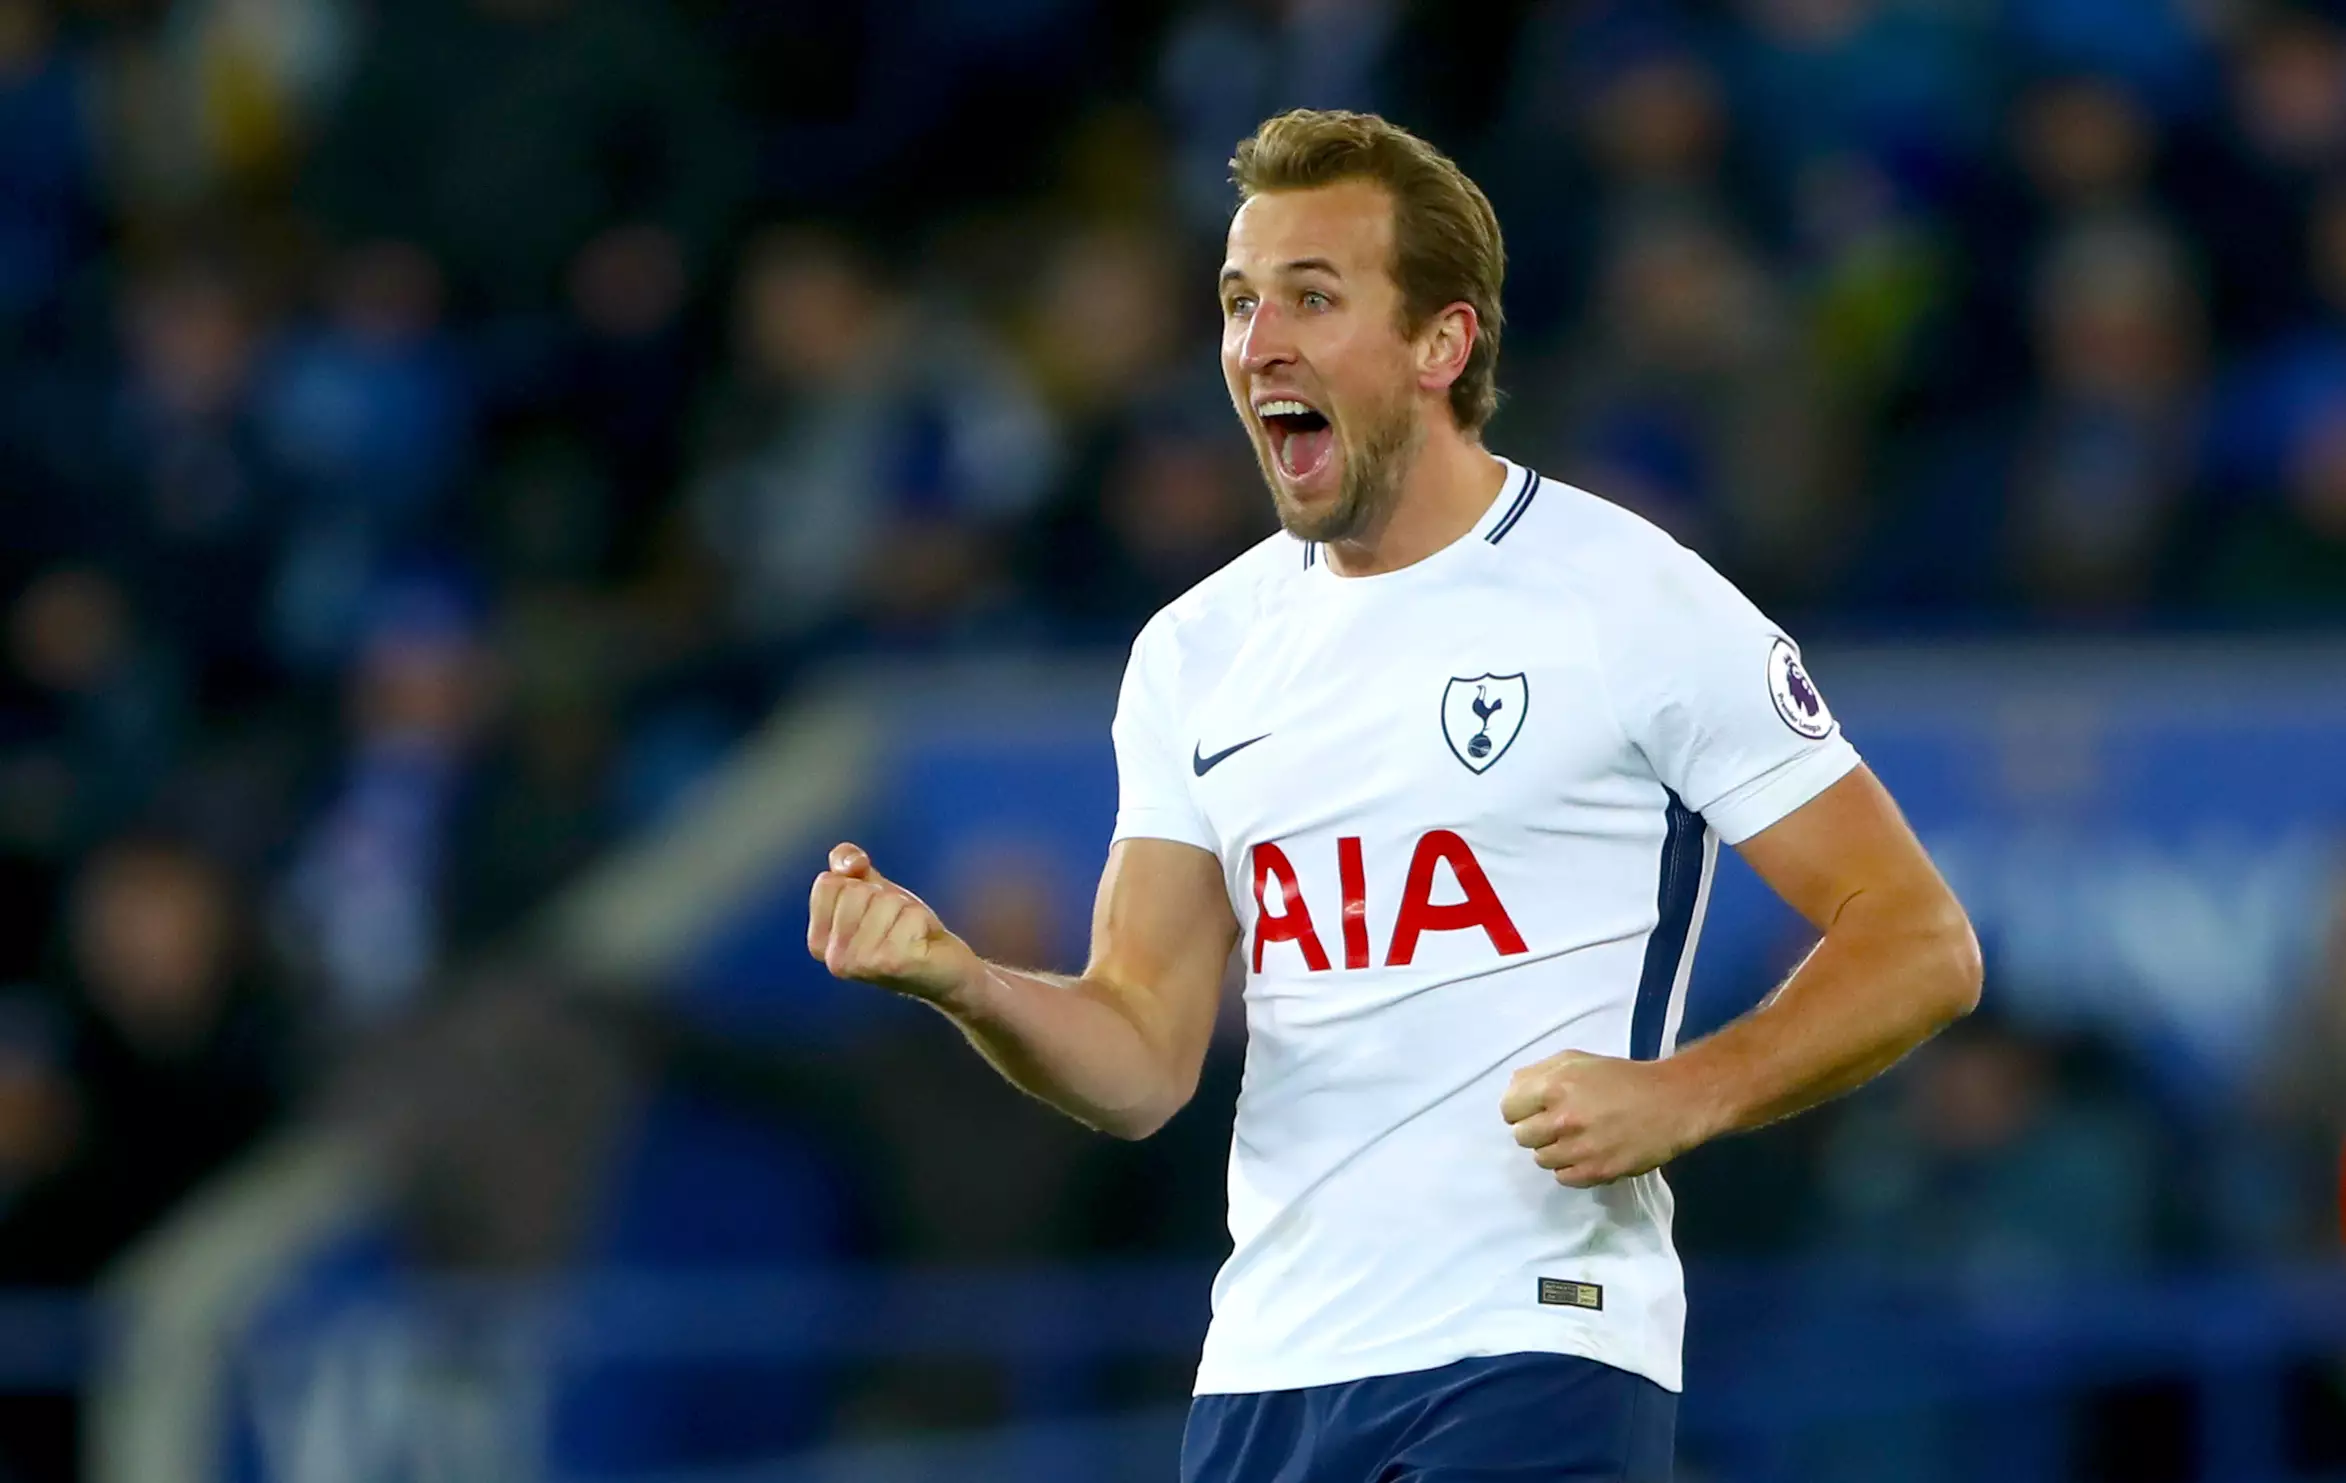 Kane has been in phenomenal form for the past few season. Image: PA Images.